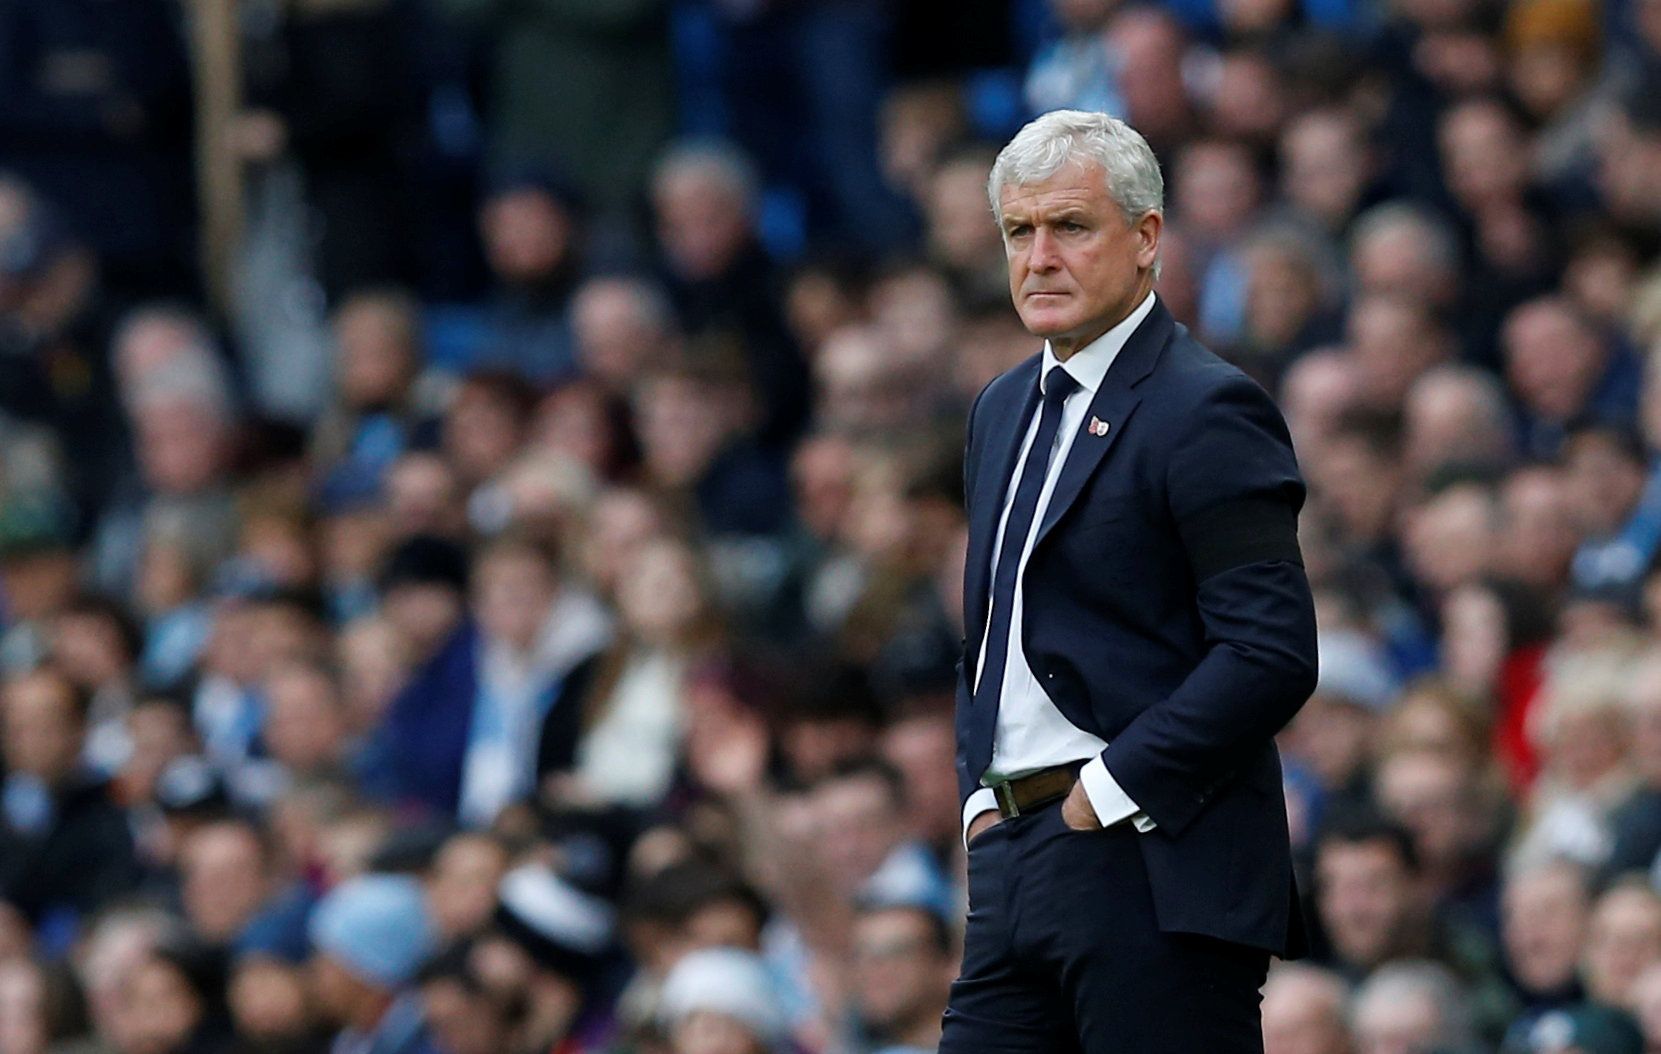 Soccer Football - Premier League - Manchester City v Southampton - Etihad Stadium, Manchester, Britain - November 4, 2018  Southampton manager Mark Hughes looks dejected   REUTERS/Andrew Yates  EDITORIAL USE ONLY. No use with unauthorized audio, video, data, fixture lists, club/league logos or "live" services. Online in-match use limited to 75 images, no video emulation. No use in betting, games or single club/league/player publications.  Please contact your account representative for further de